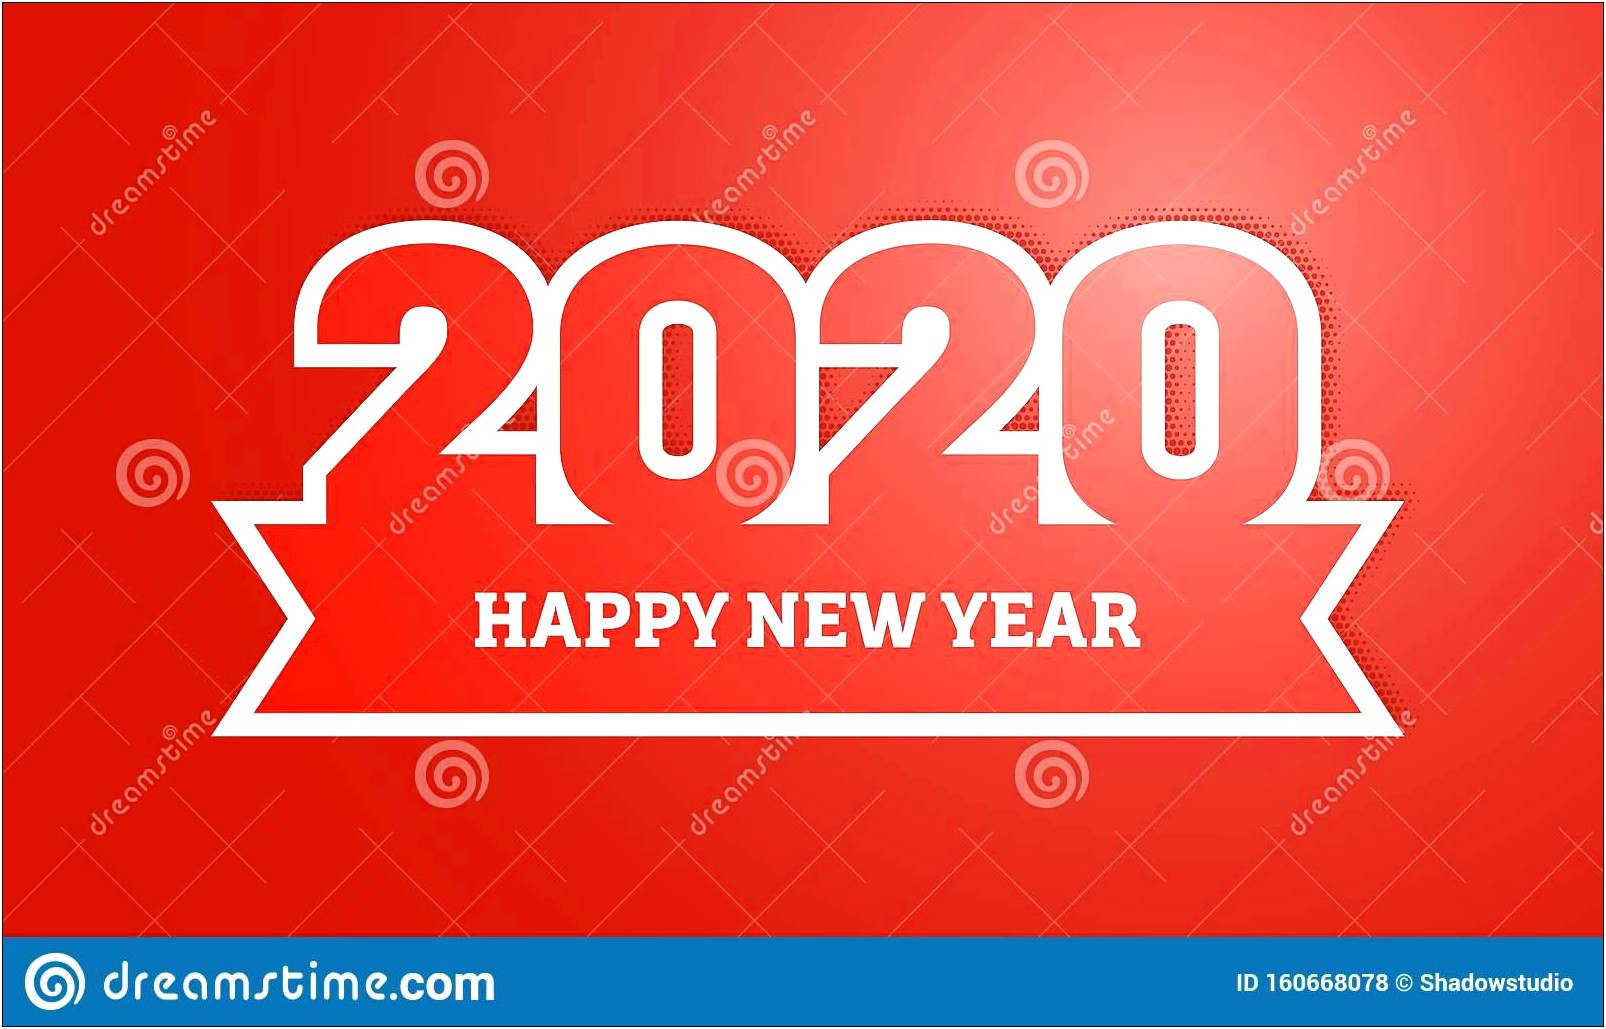 Happy New Year Photo Template Free